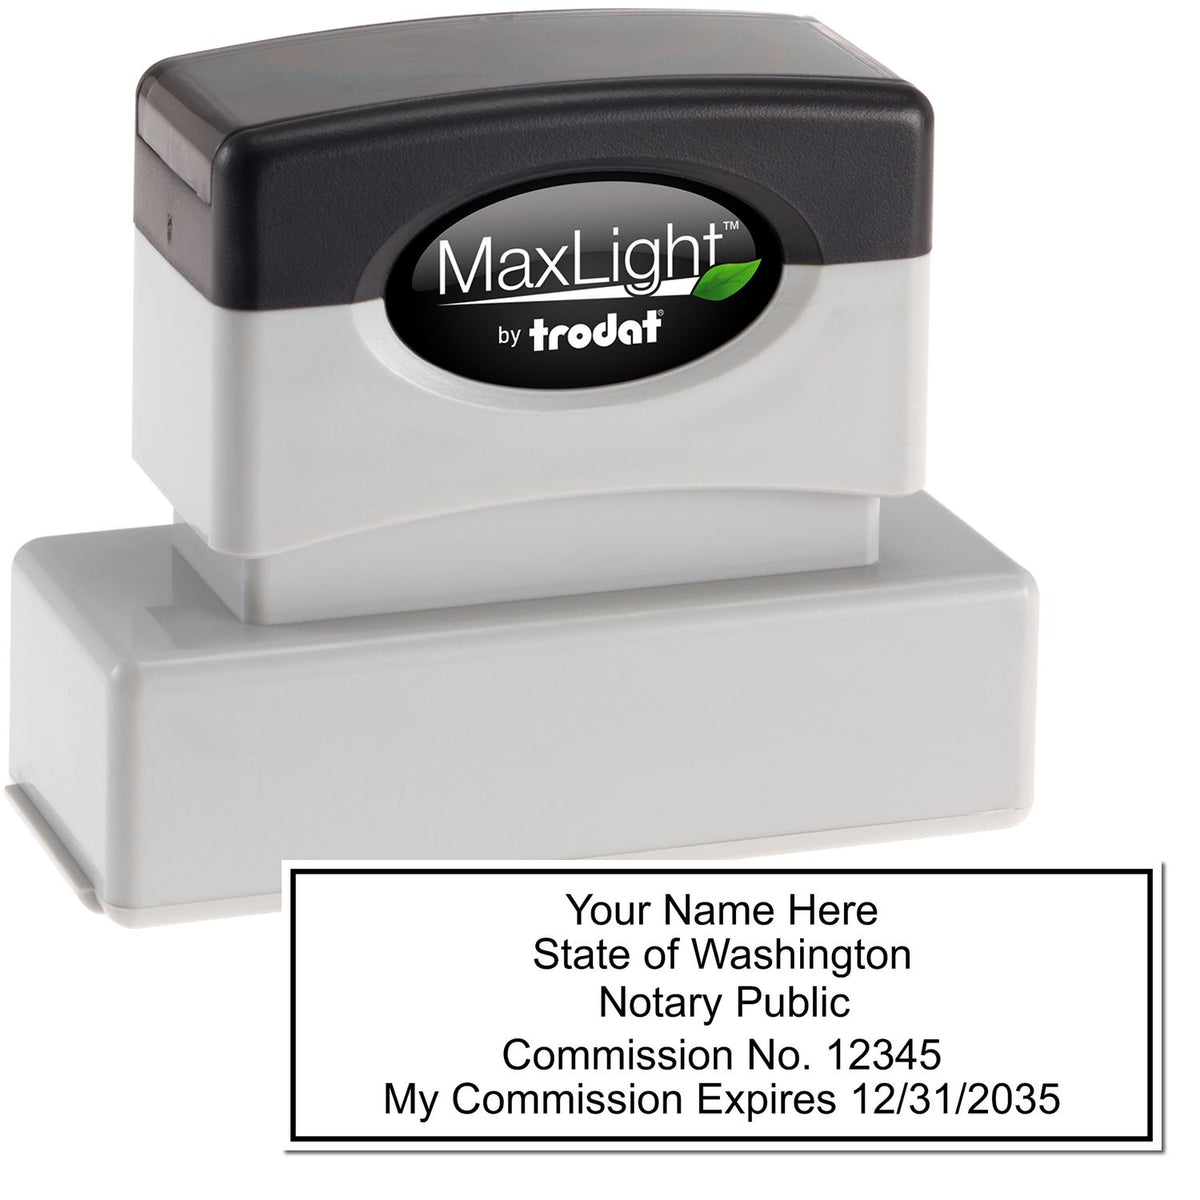 The main image for the MaxLight Premium Pre-Inked Washington Rectangular Notarial Stamp depicting a sample of the imprint and electronic files